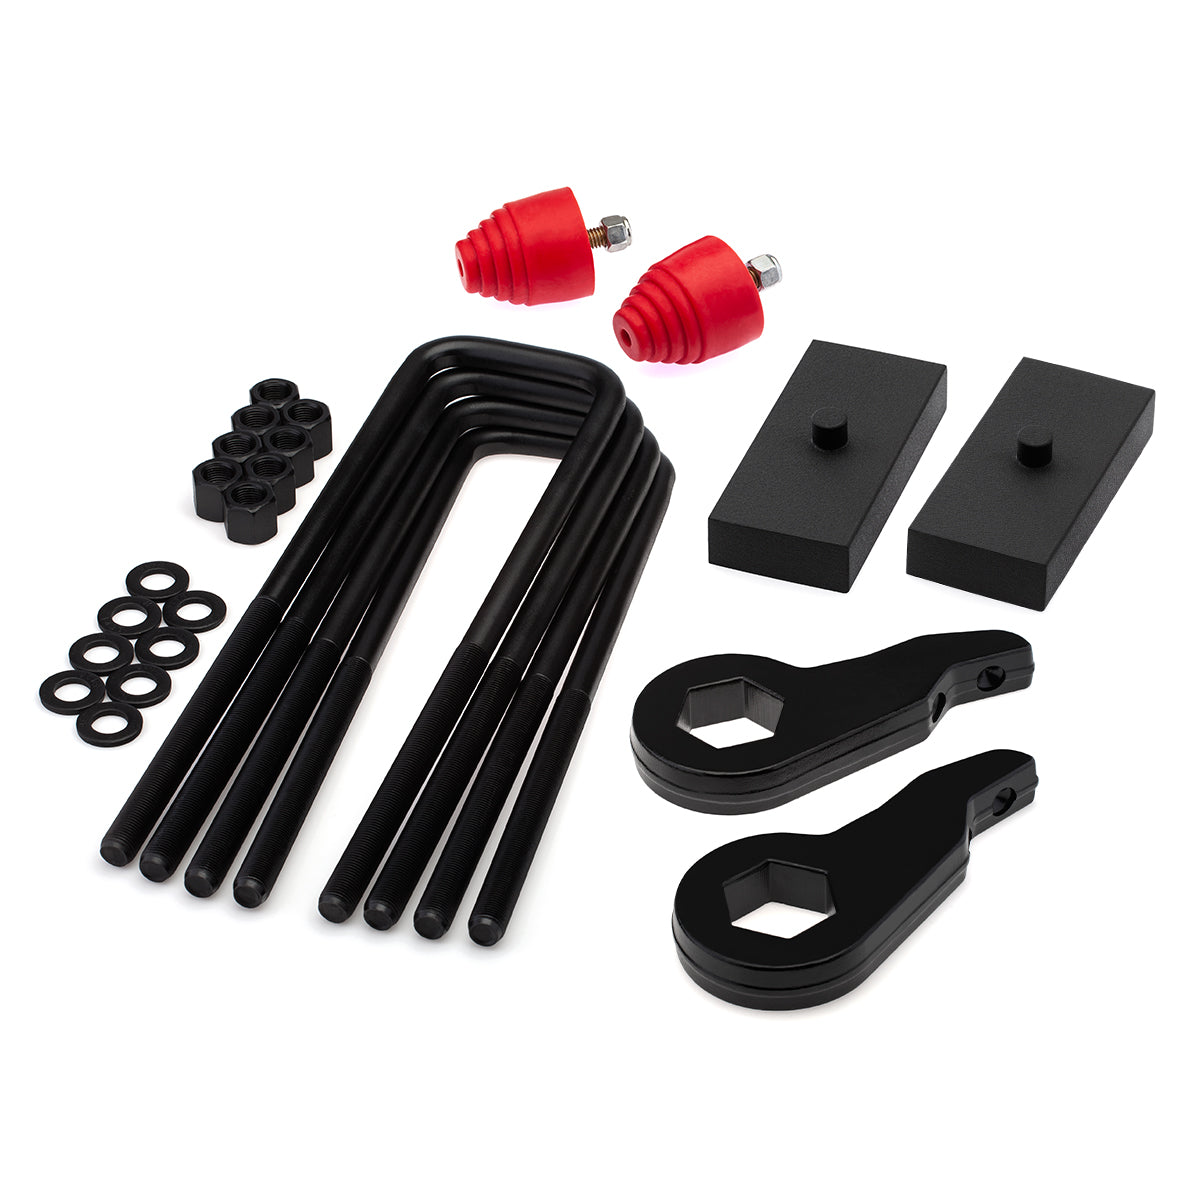 1997-2012 Ford Ranger Full Lift Kit with Torsion Key Unloading/Removal Tool and Bump Stops